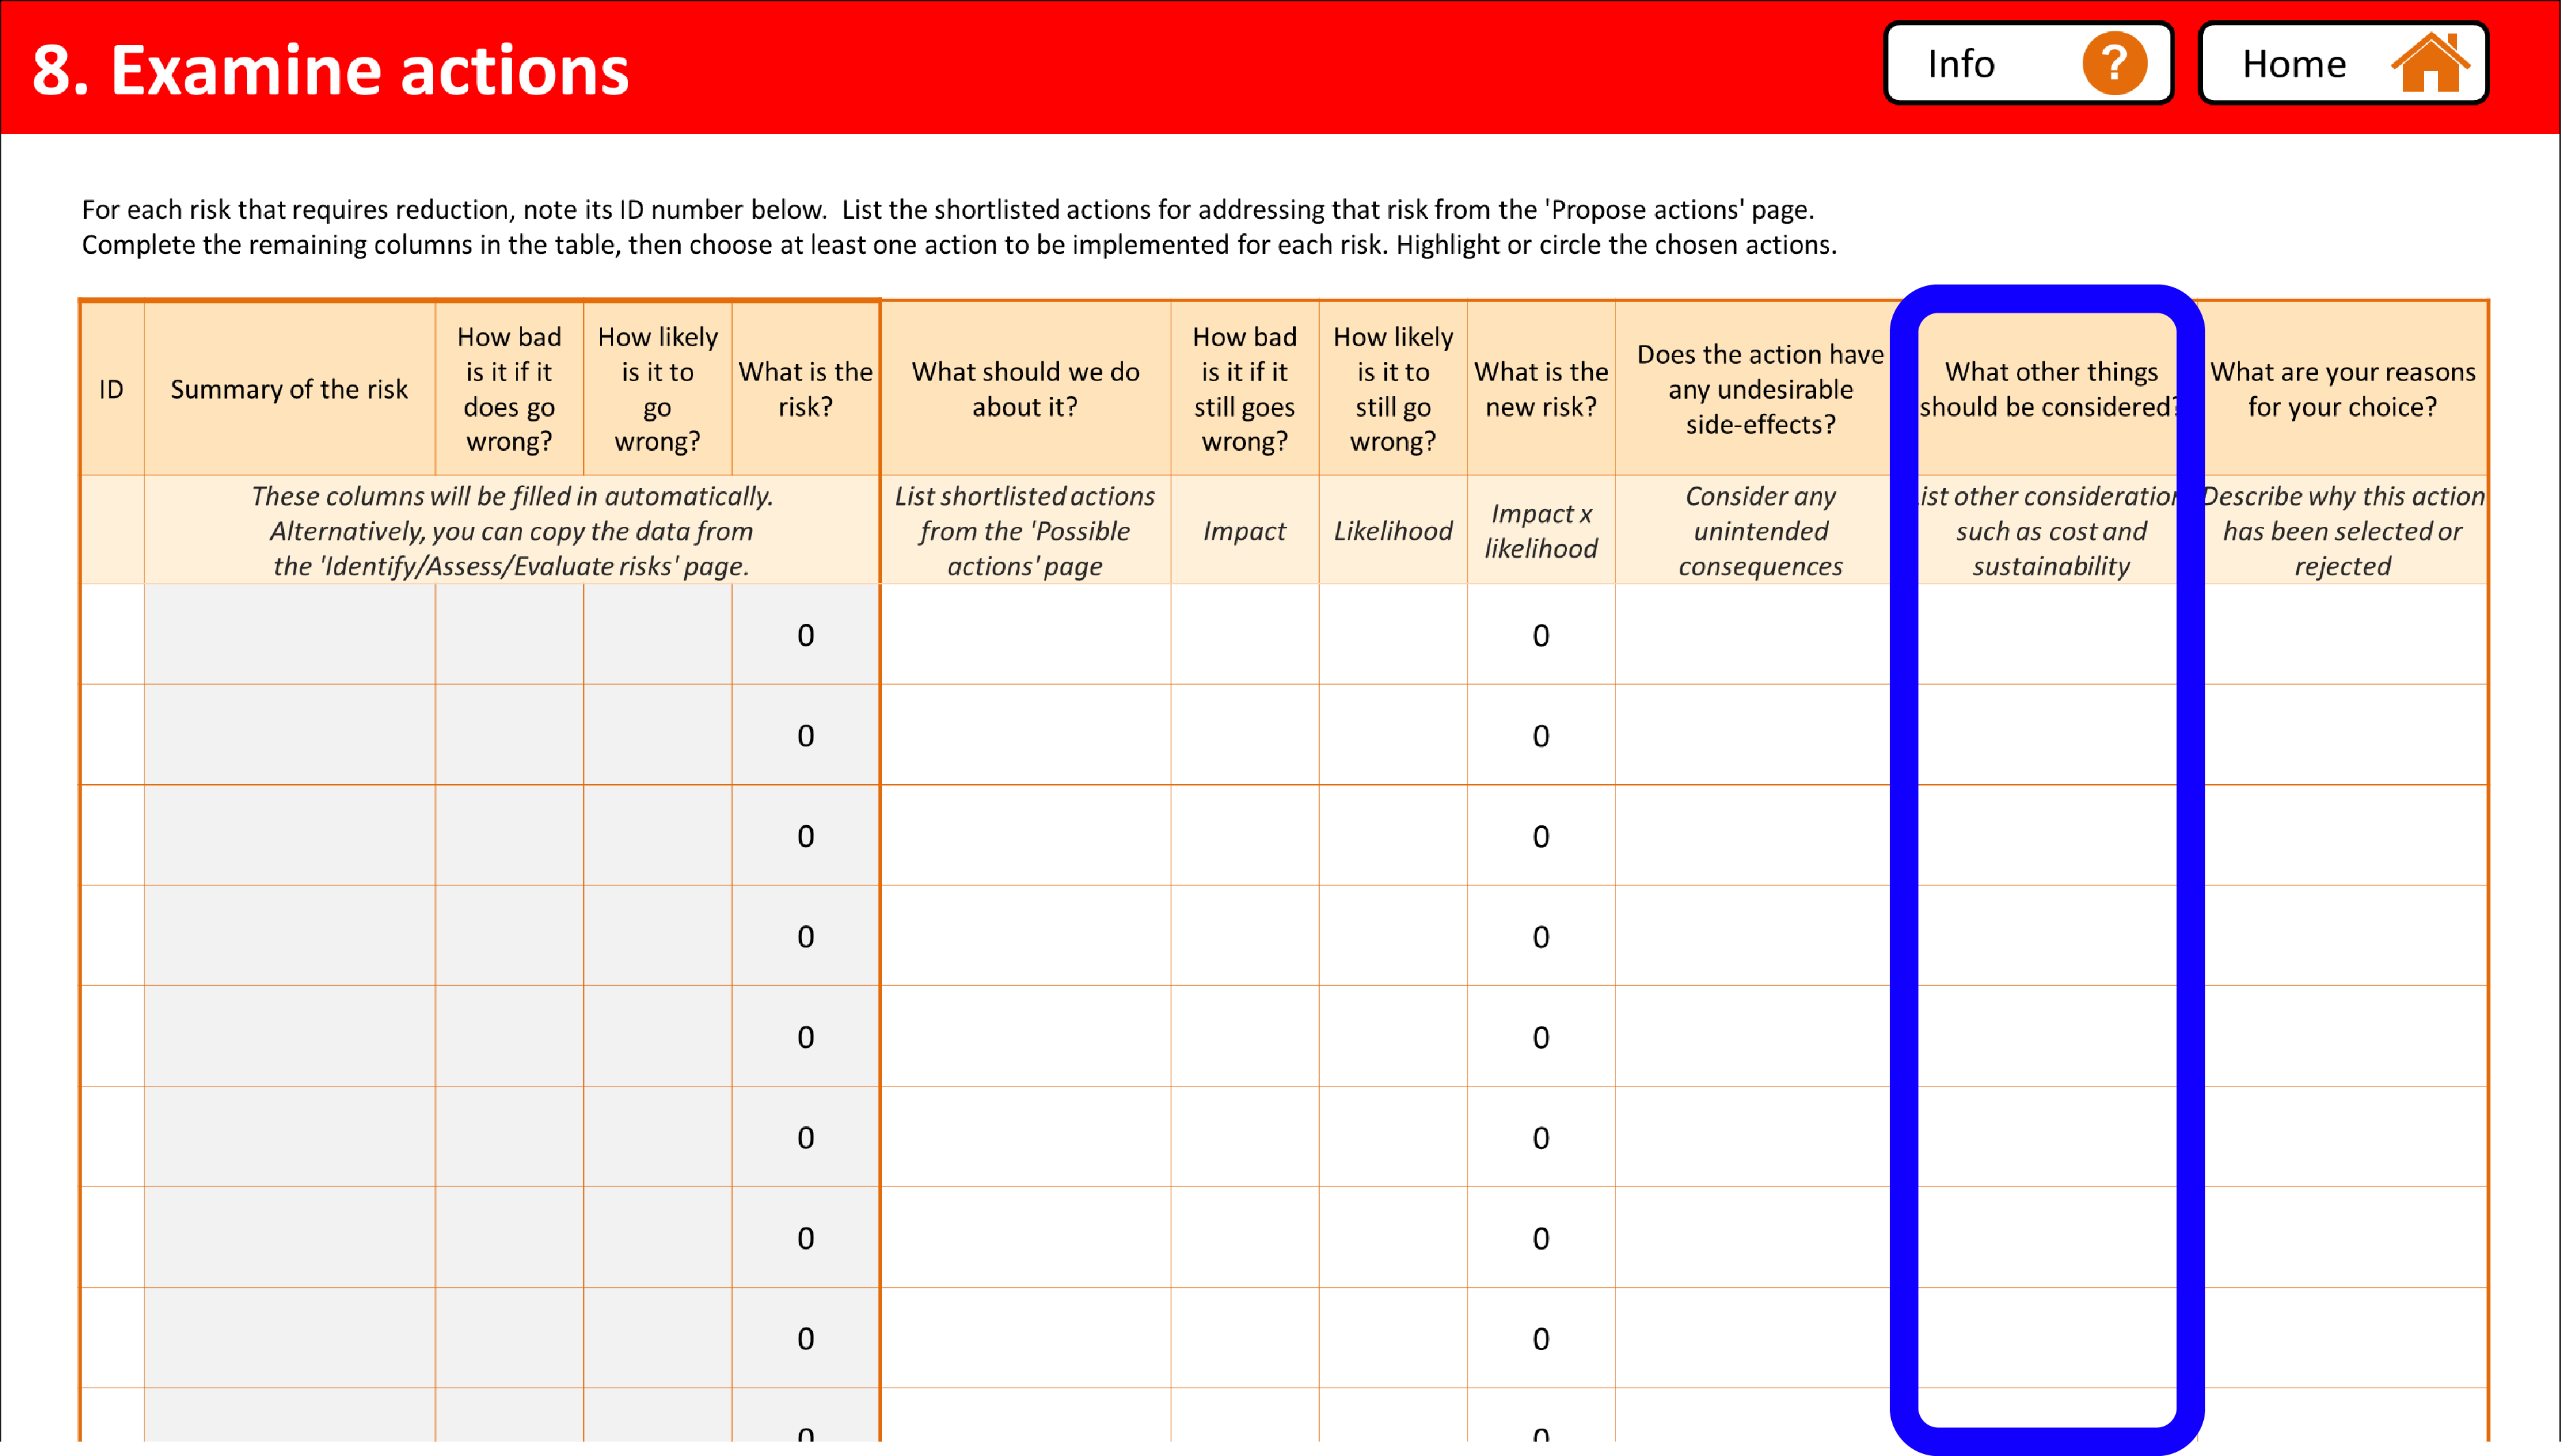 Screenshot of Examine actions page of the assessment form